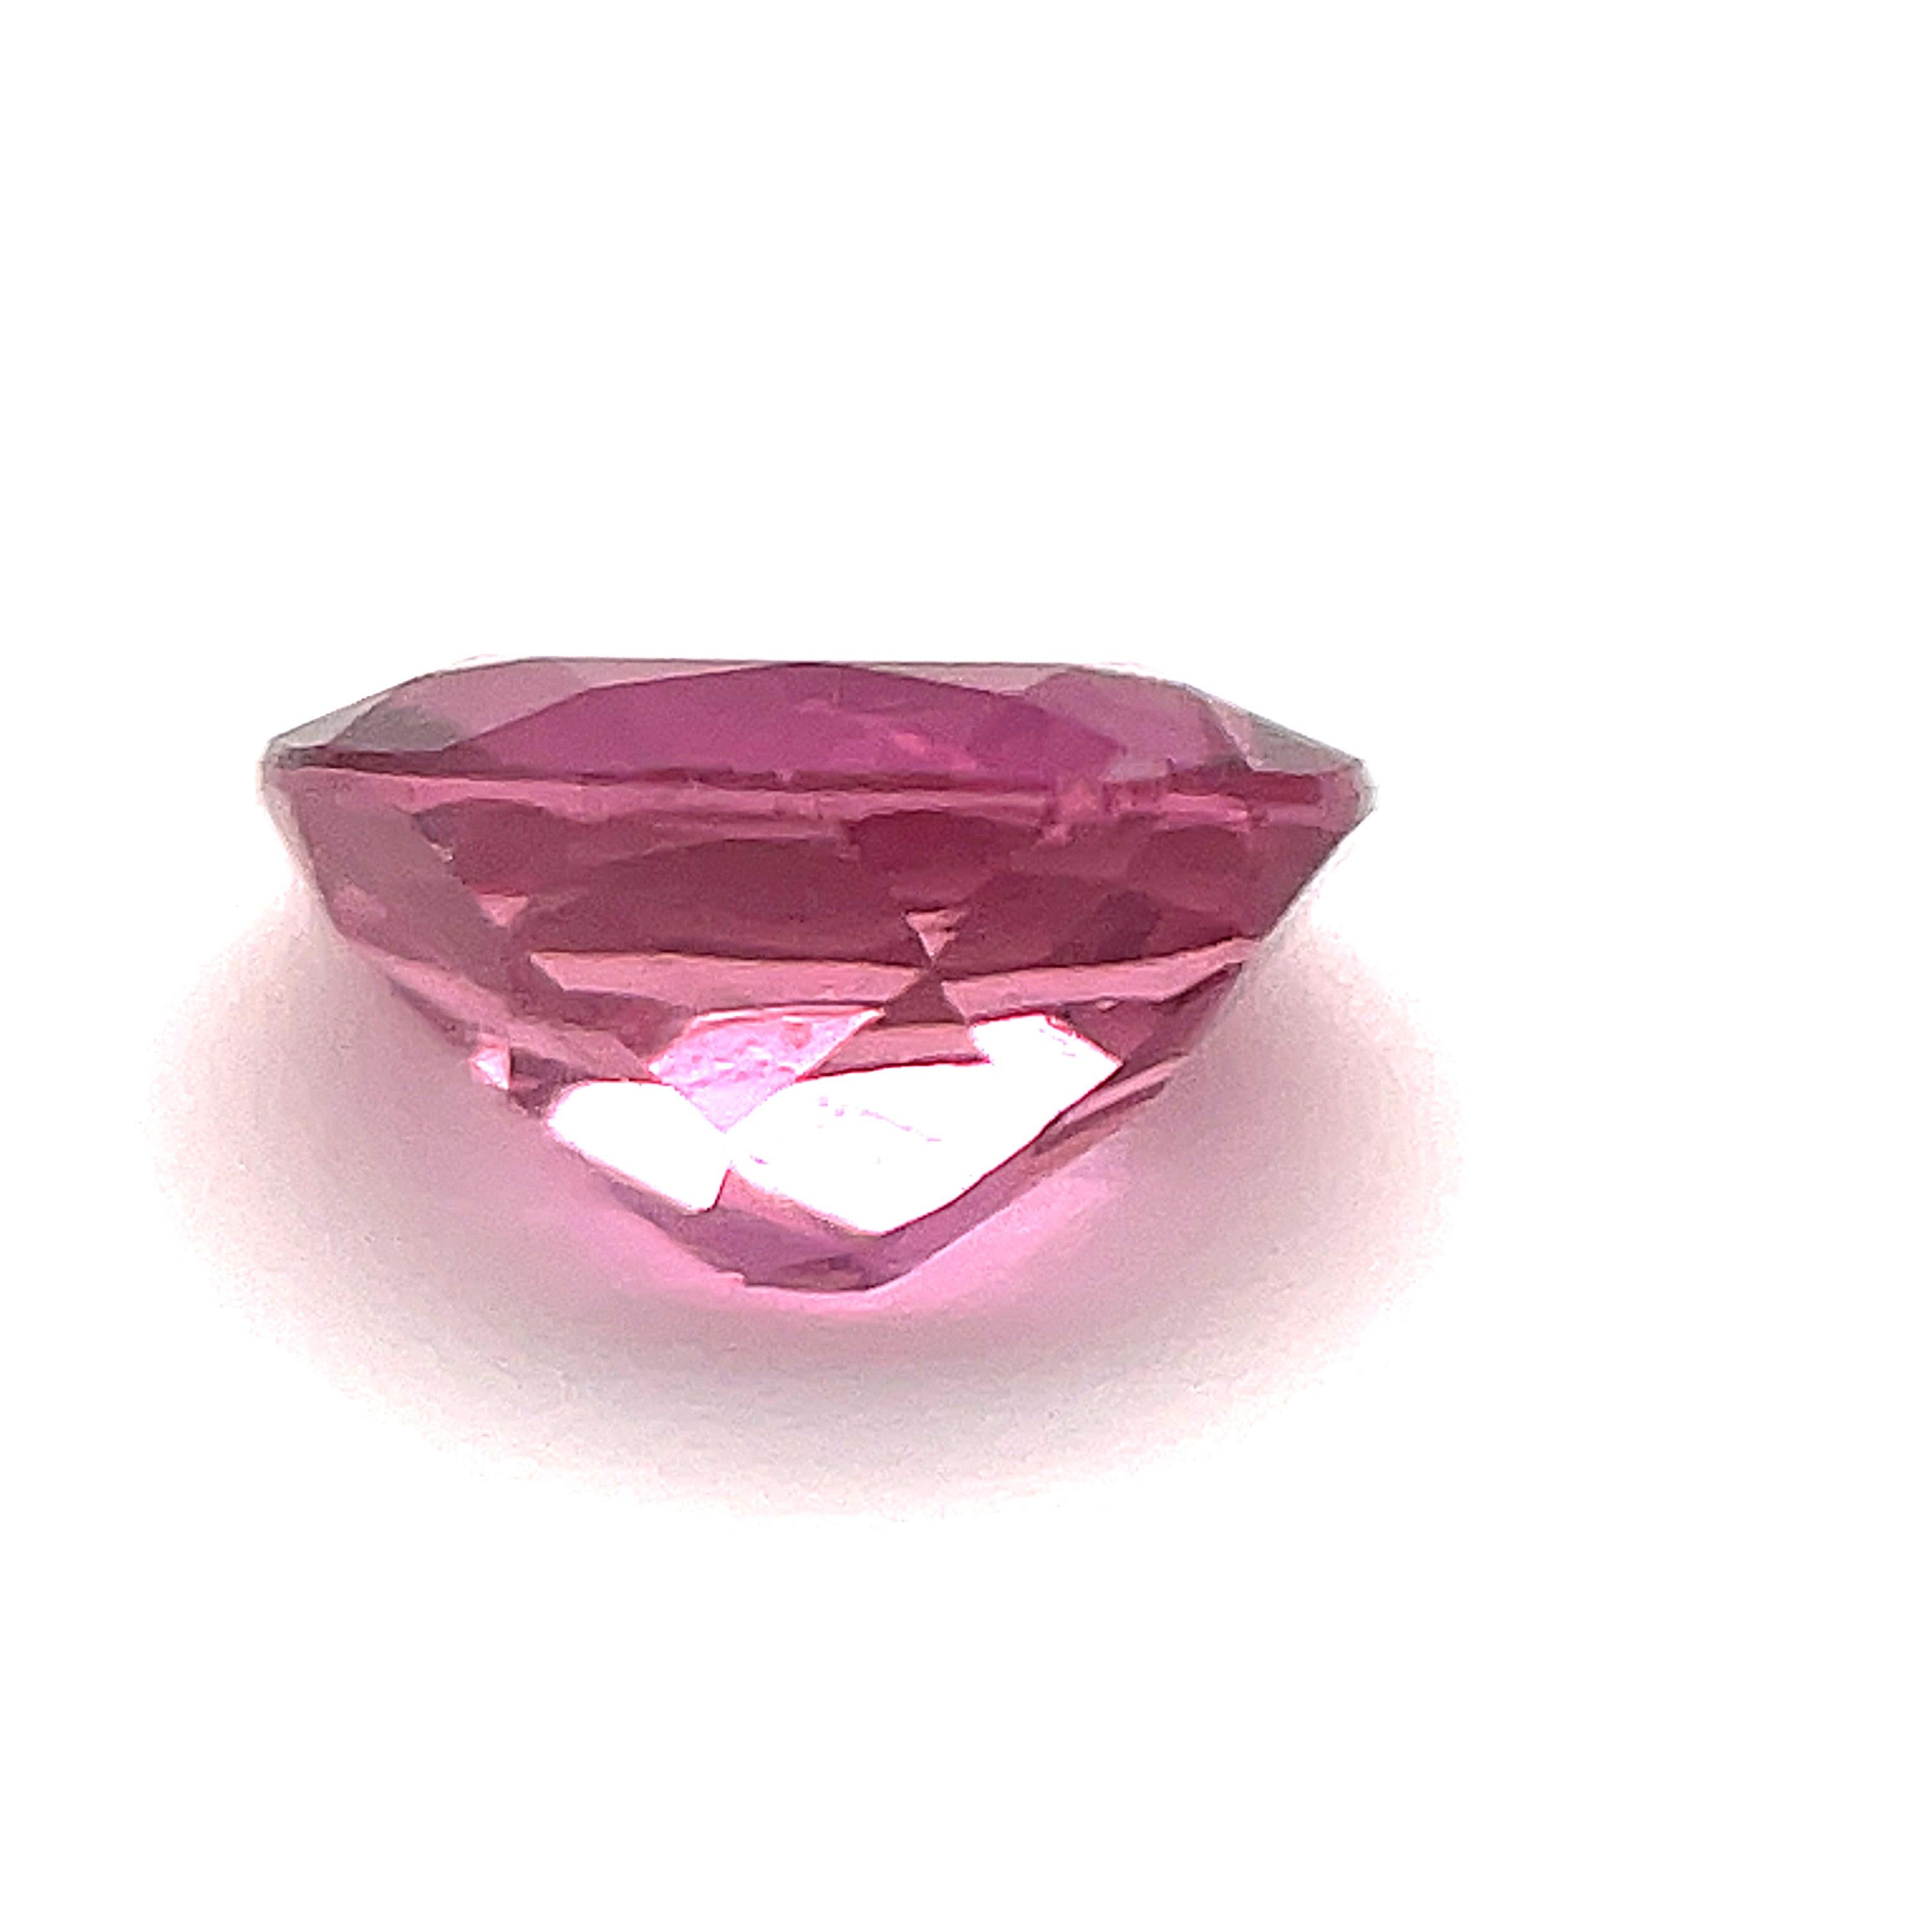 Women's or Men's 1.02 Oval Unset Unmounted Loose Pink Tourmaline Gemstone For Sale